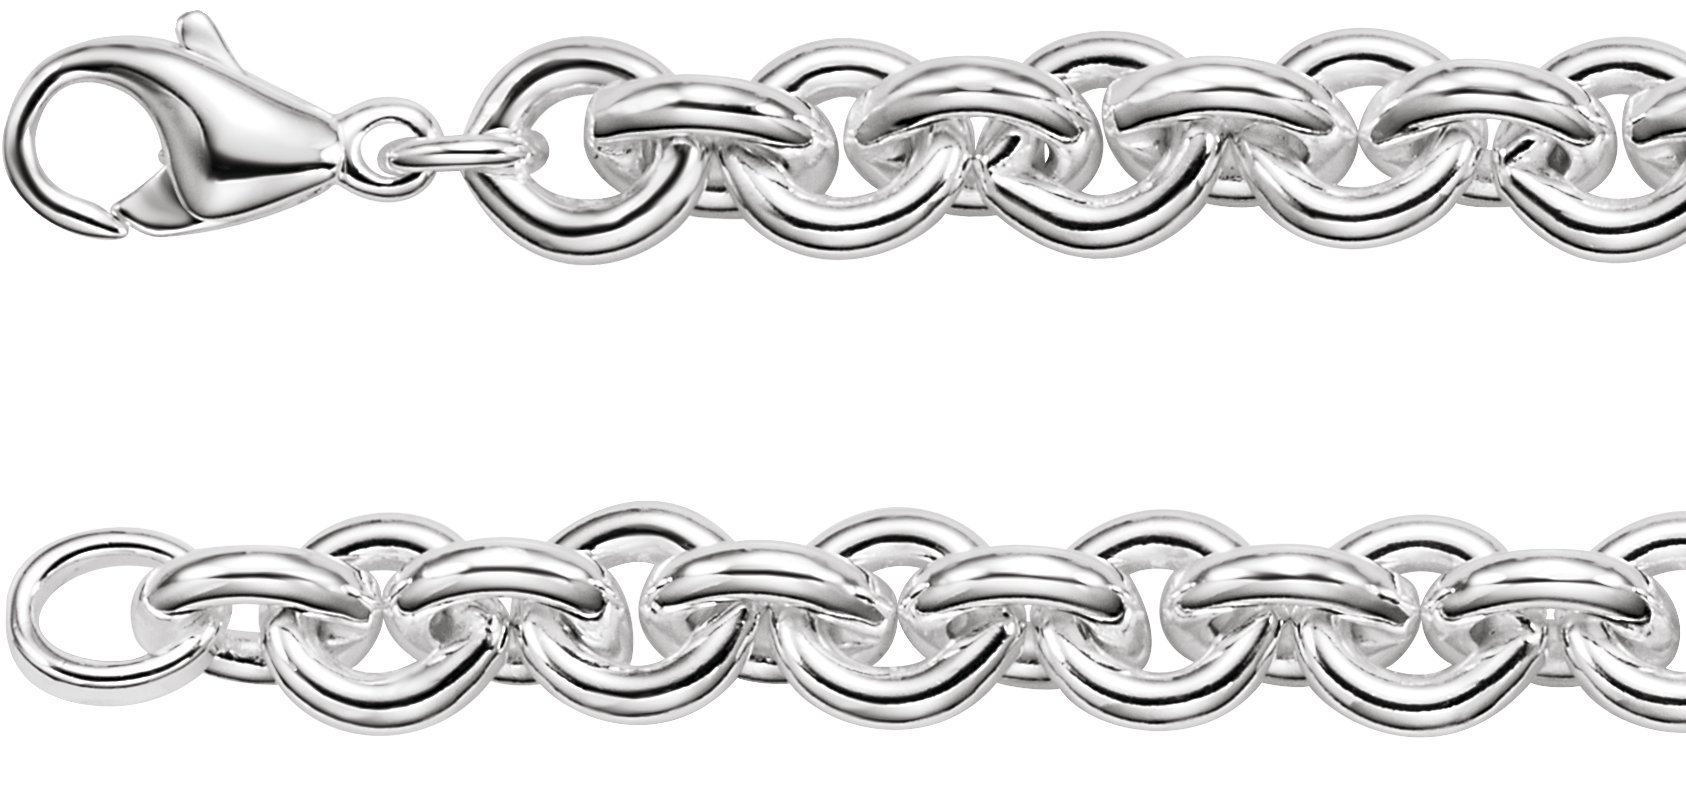 Sterling Silver 9 mm Round Cable 17" Chain